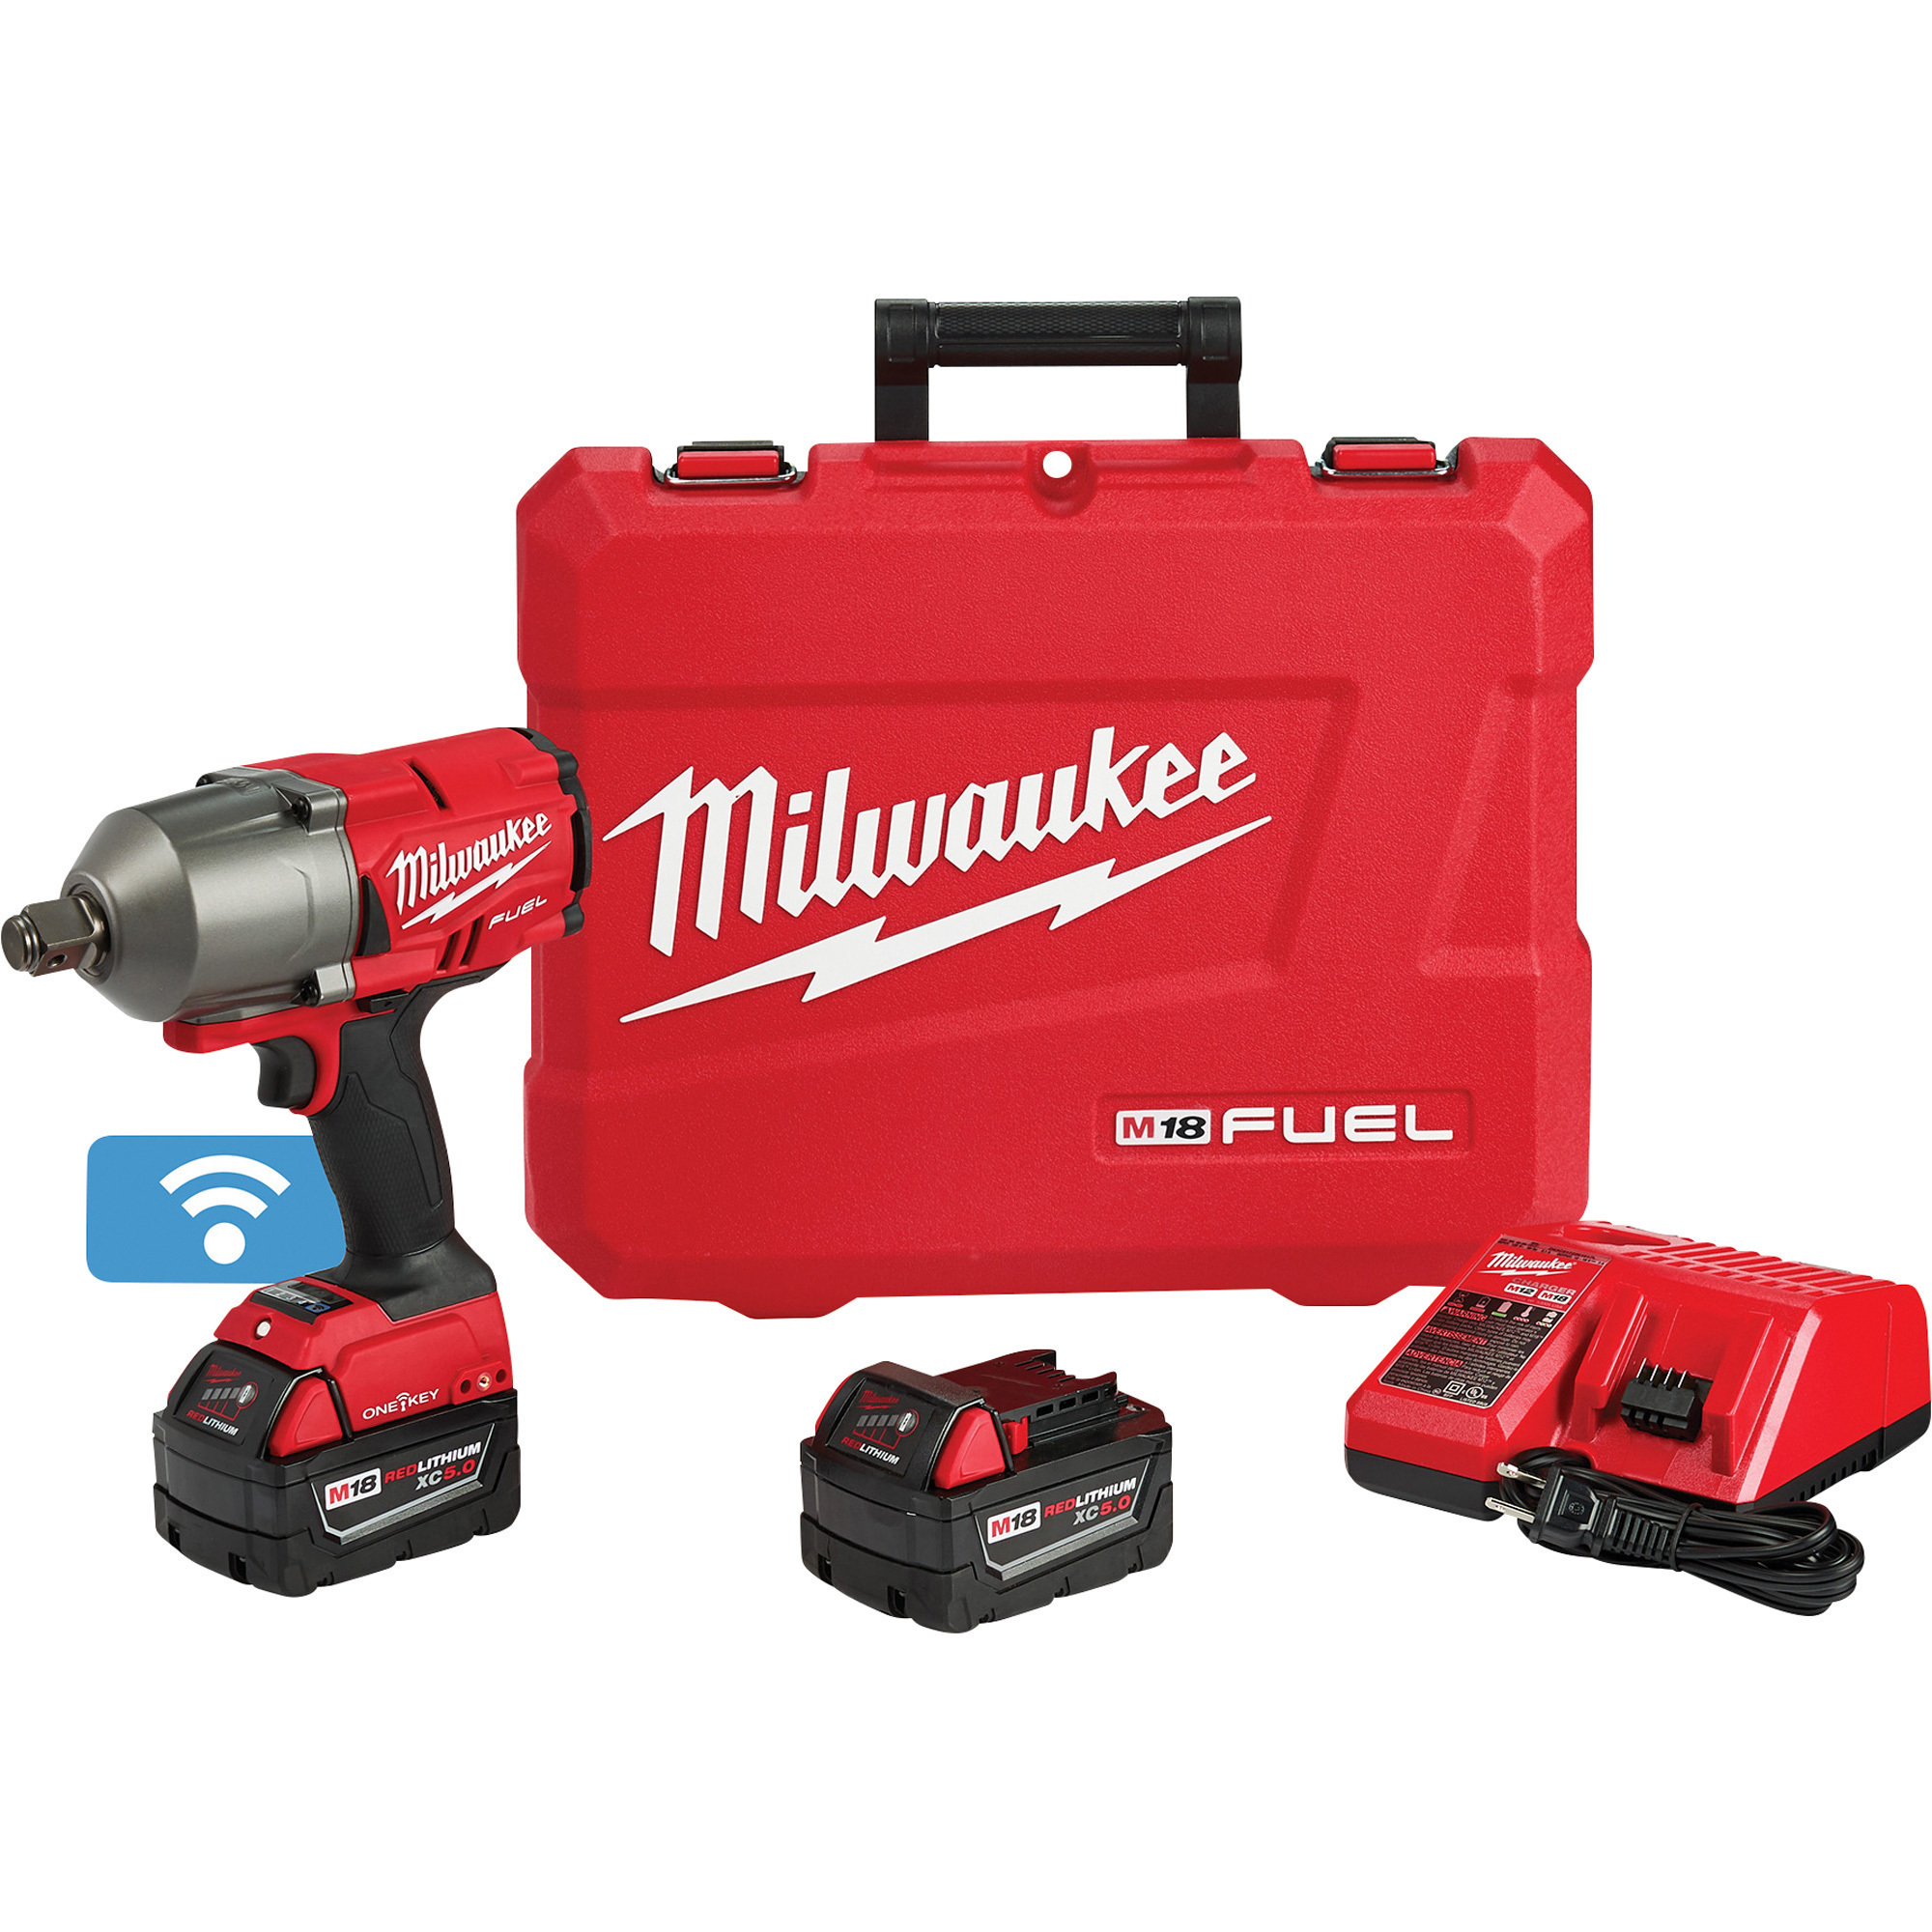 Milwaukee M18 FUEL ONE-KEY 3/4in. Drive, 1500 Ft./Lbs. Torque Impact Wrench Kit with Friction Ring â 2 Batteries, Model 2864-22R